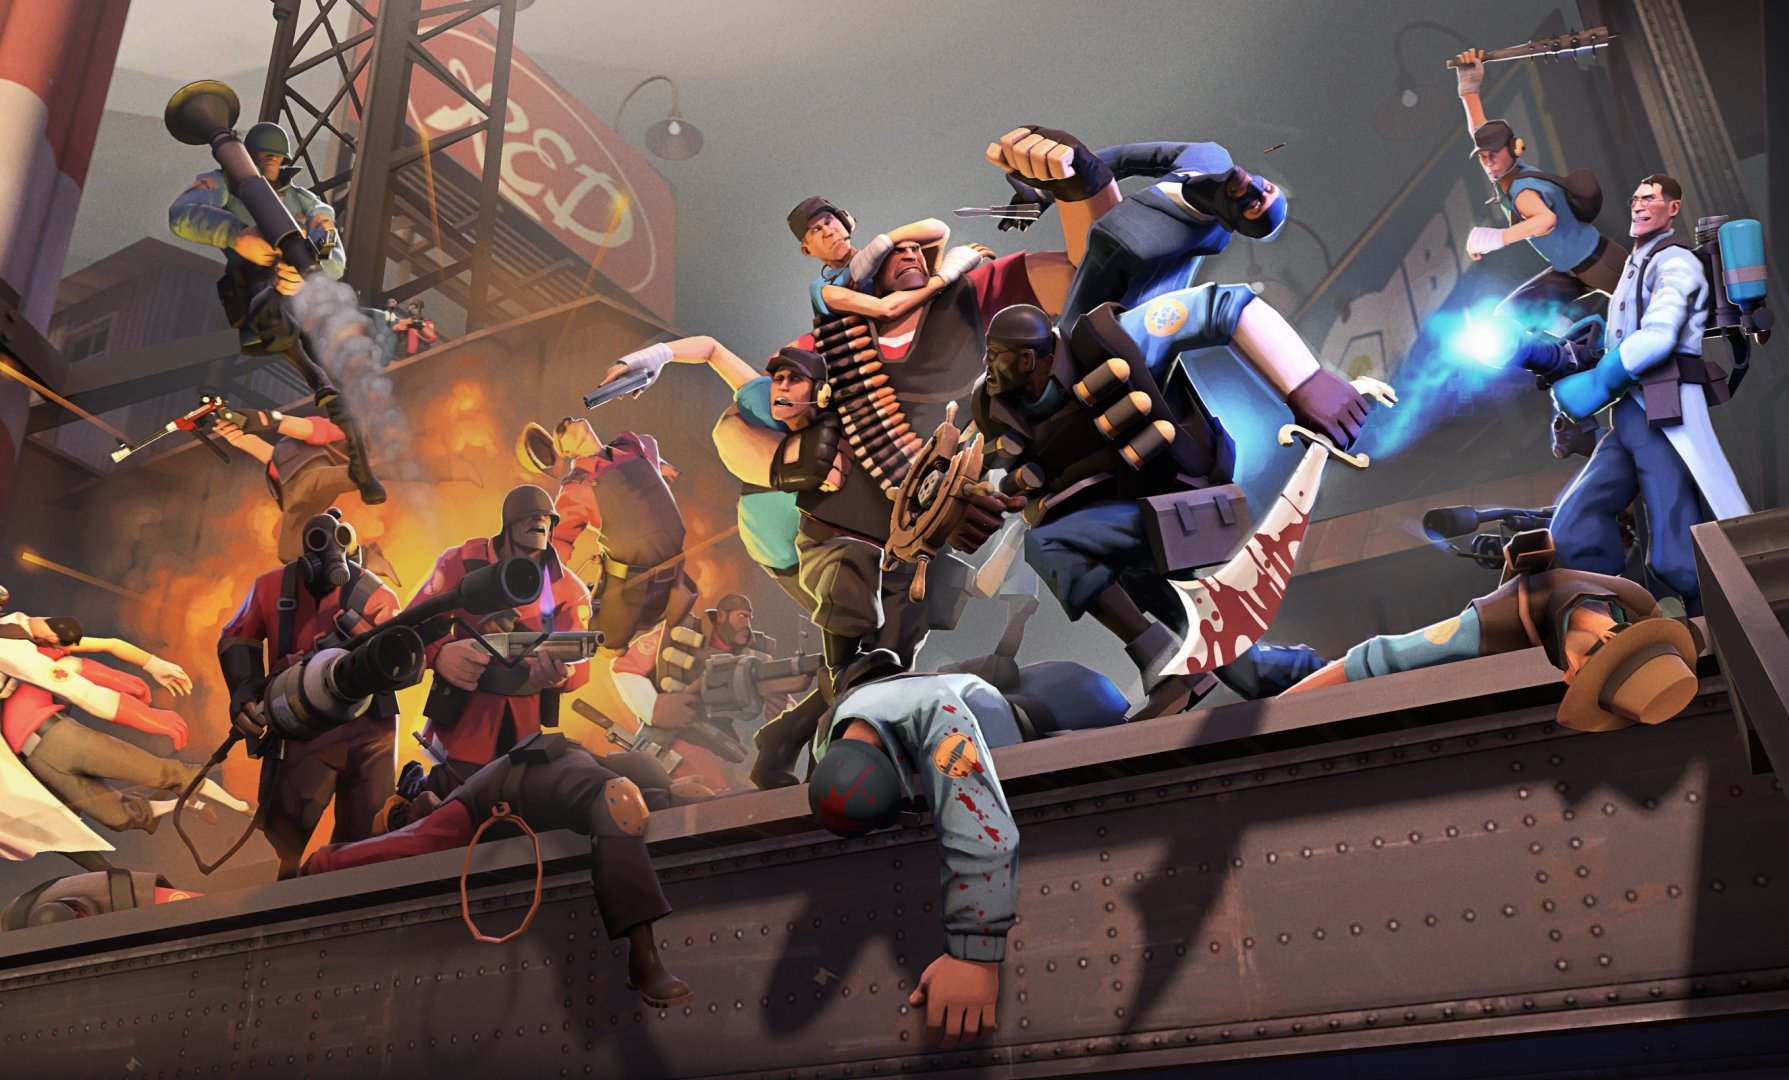 Team Fortress 2 players have figured out how to fight cheaters